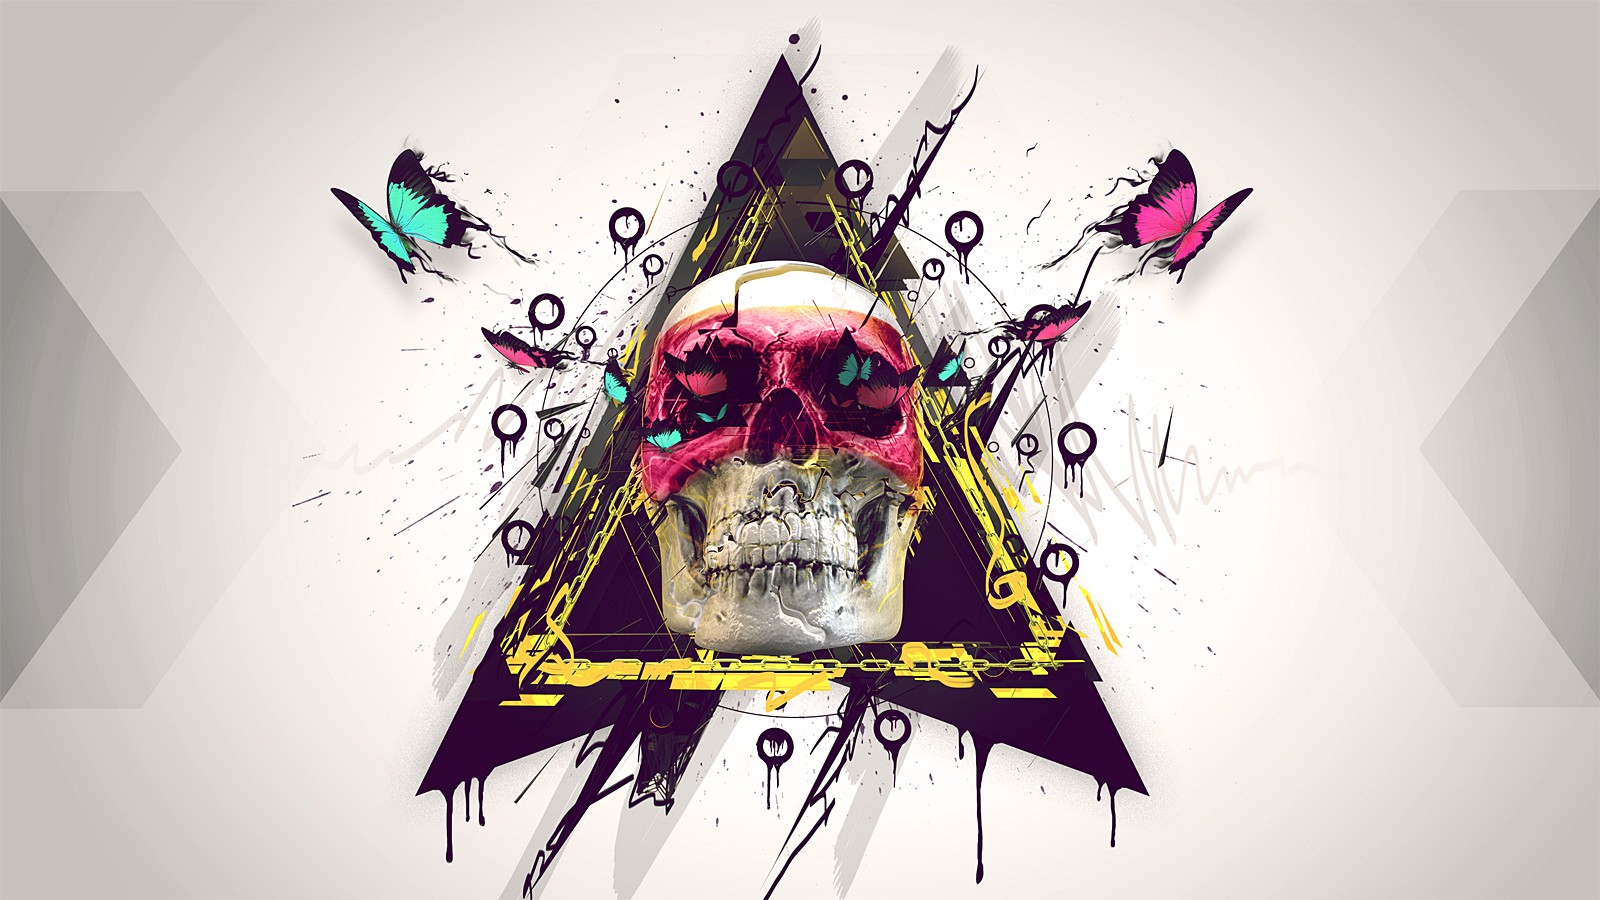 Skull, Triangle, And Butterfly Image - Abstract Skull Wallpaper 4k - HD Wallpaper 